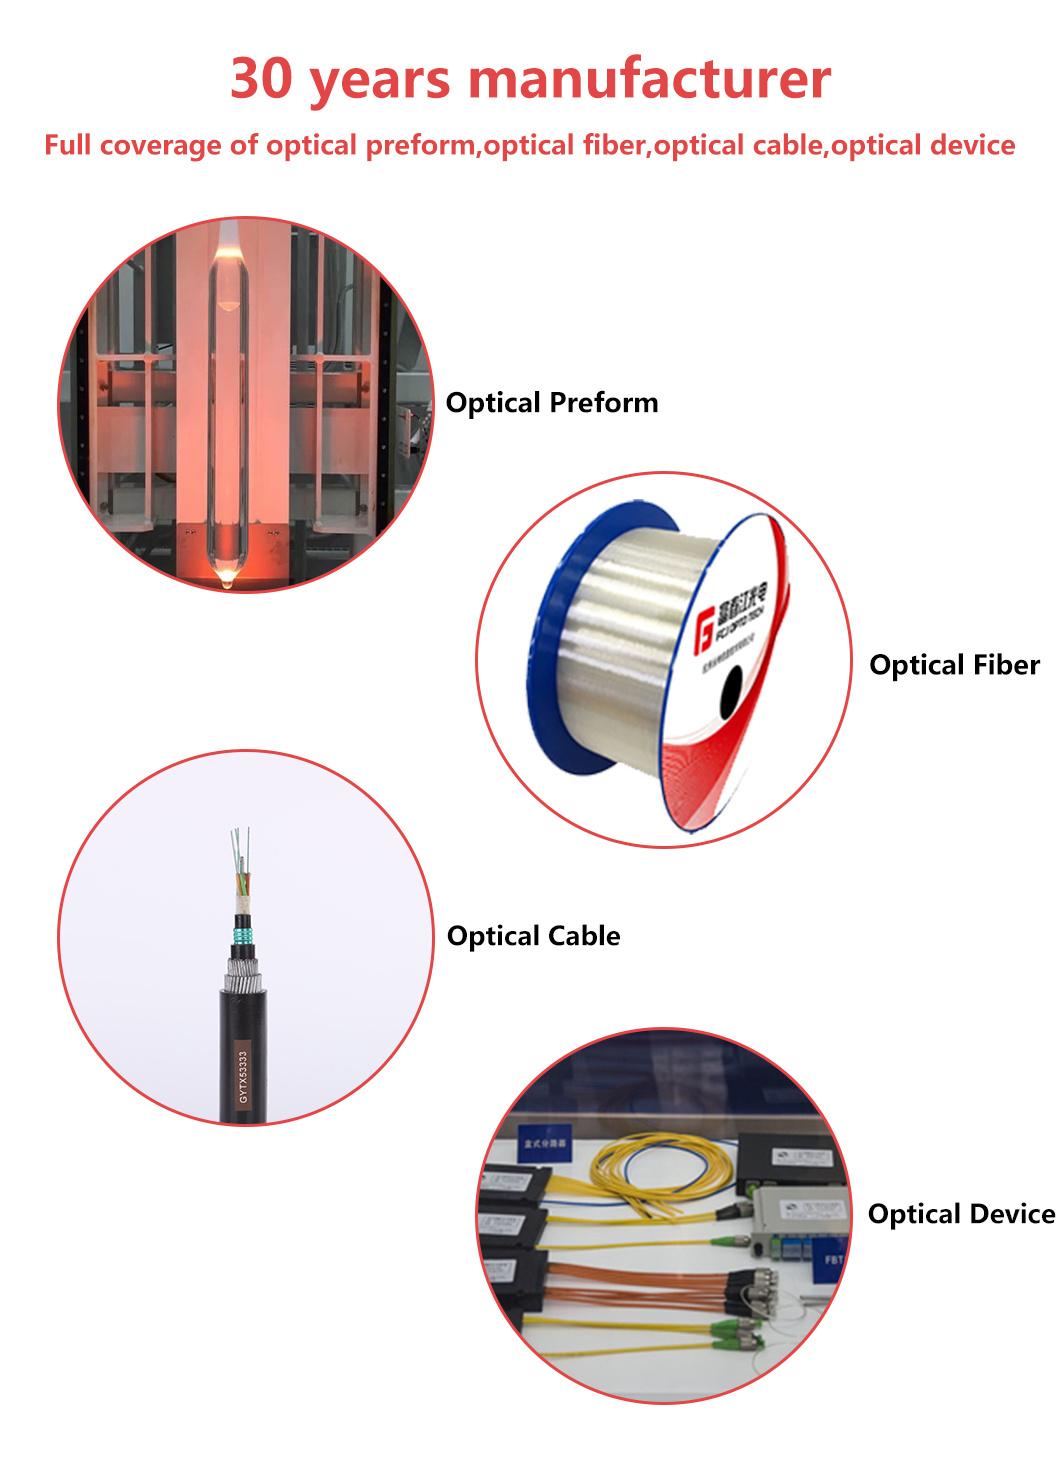 All Dielectric Self-Supporting Optical Cable / ADSS Cable 12 Fiber ISO Certification